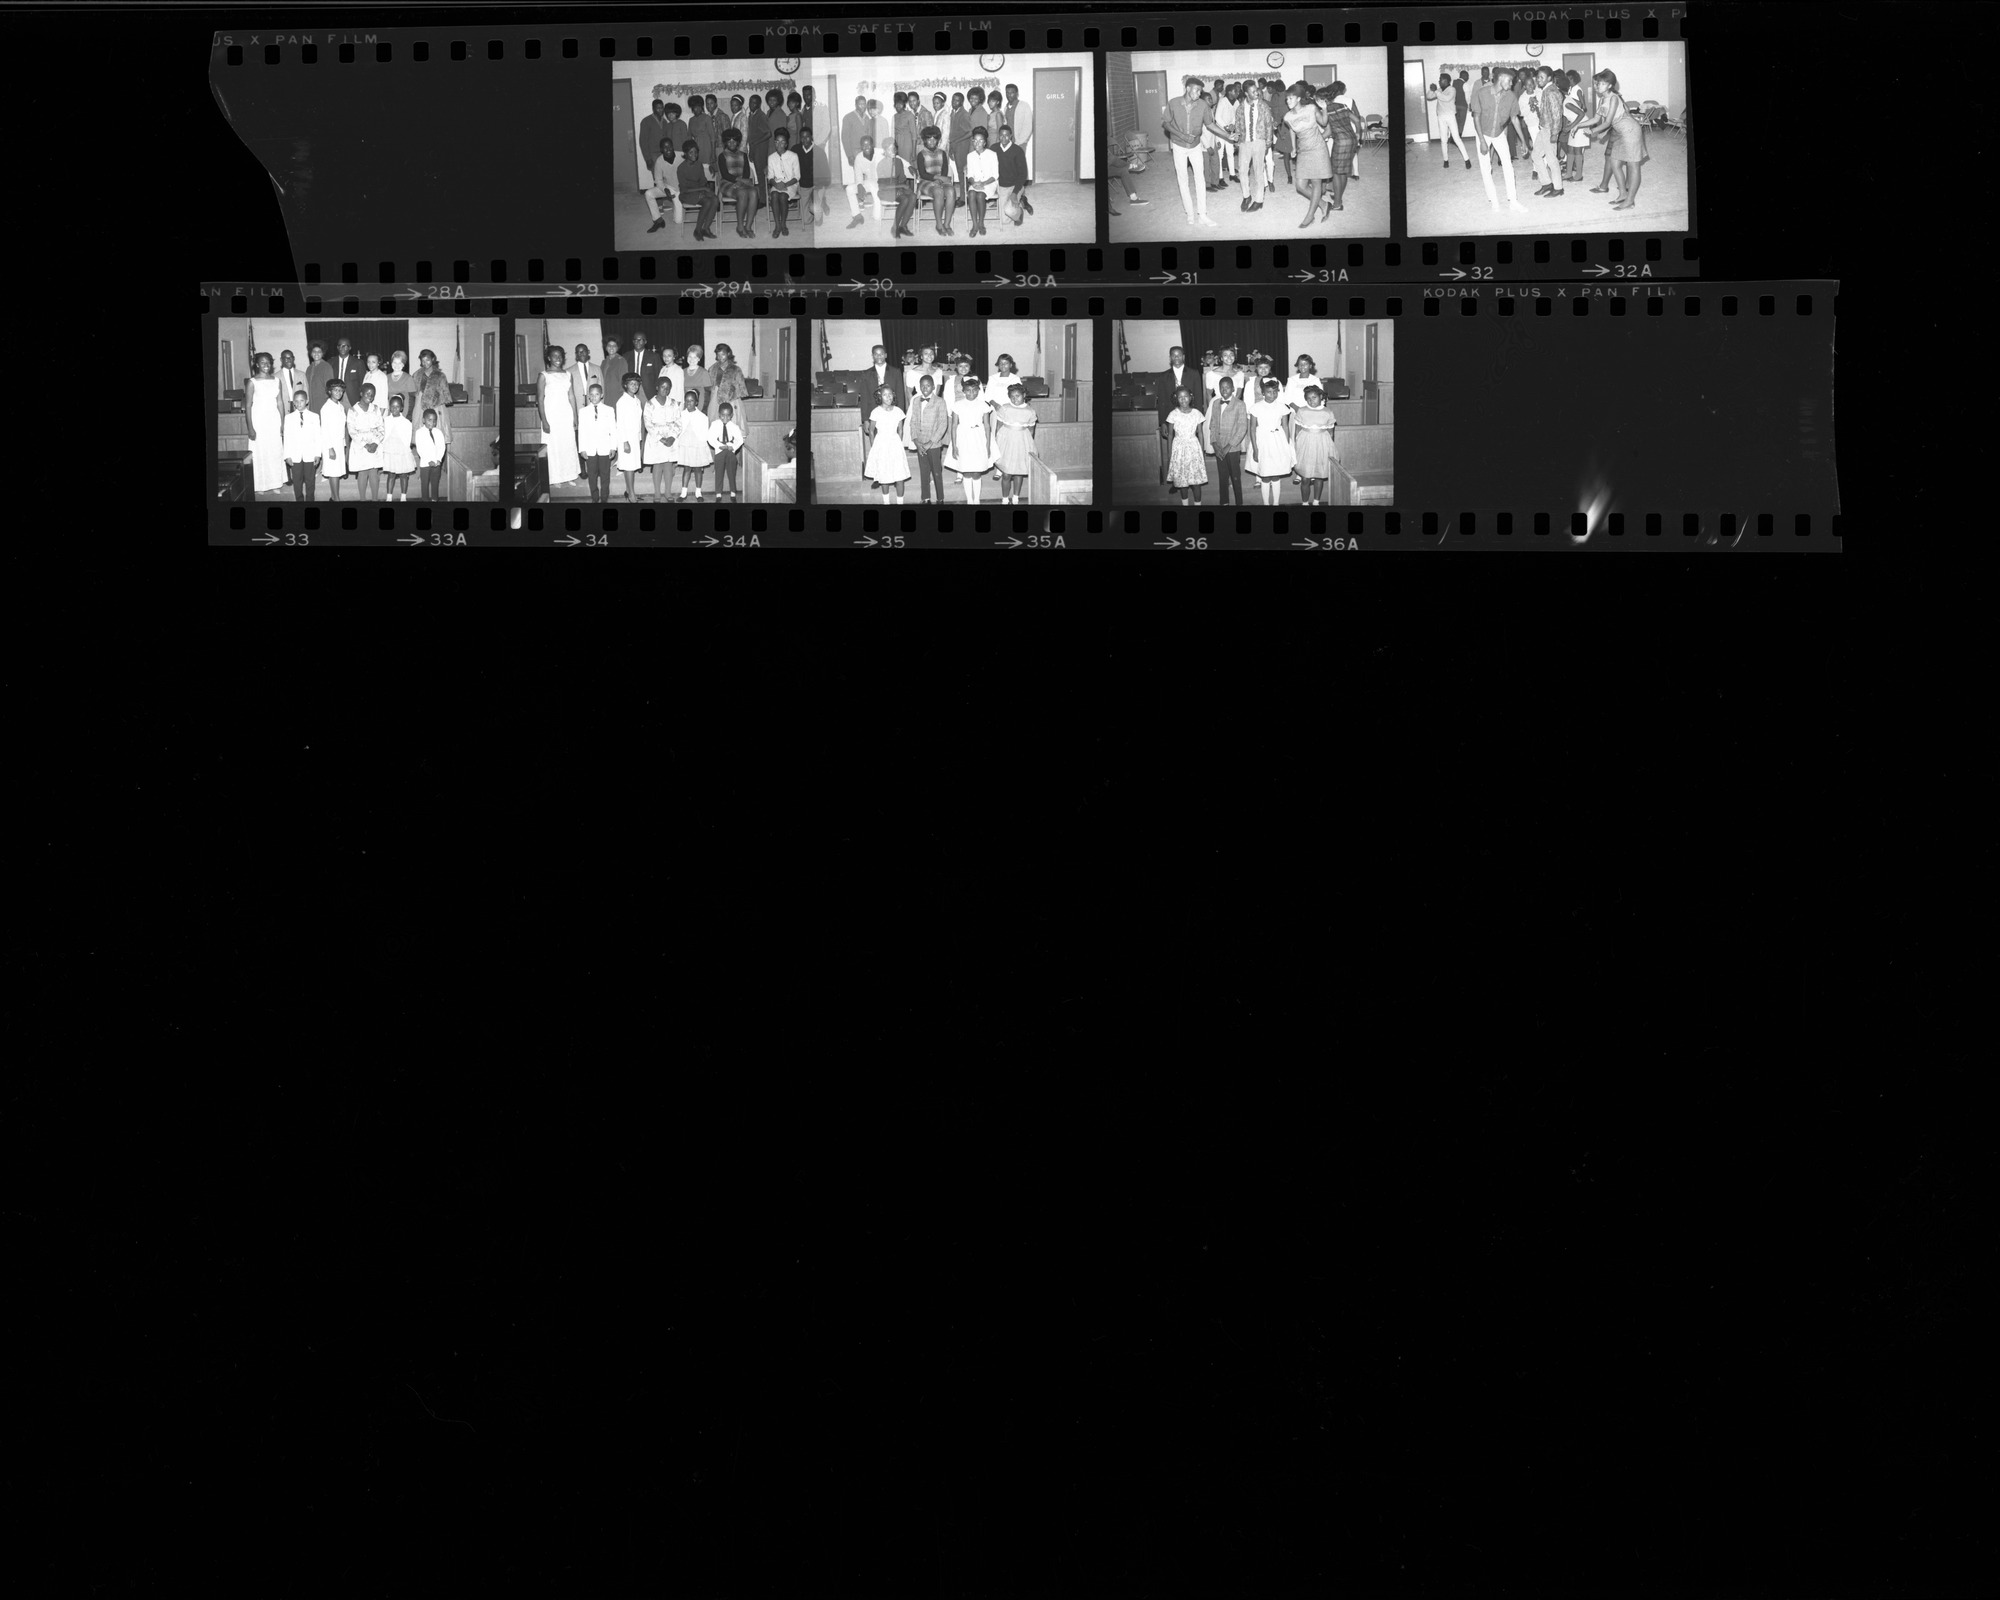 Set of negatives by Clinton Wright including beautification planners at Jo Mackey, recreation meeting at Doolittle's, Clay-Patterson fight fans, Fashionettes at Doolittle, and Sykes Recital at Zion, 1965, page 2